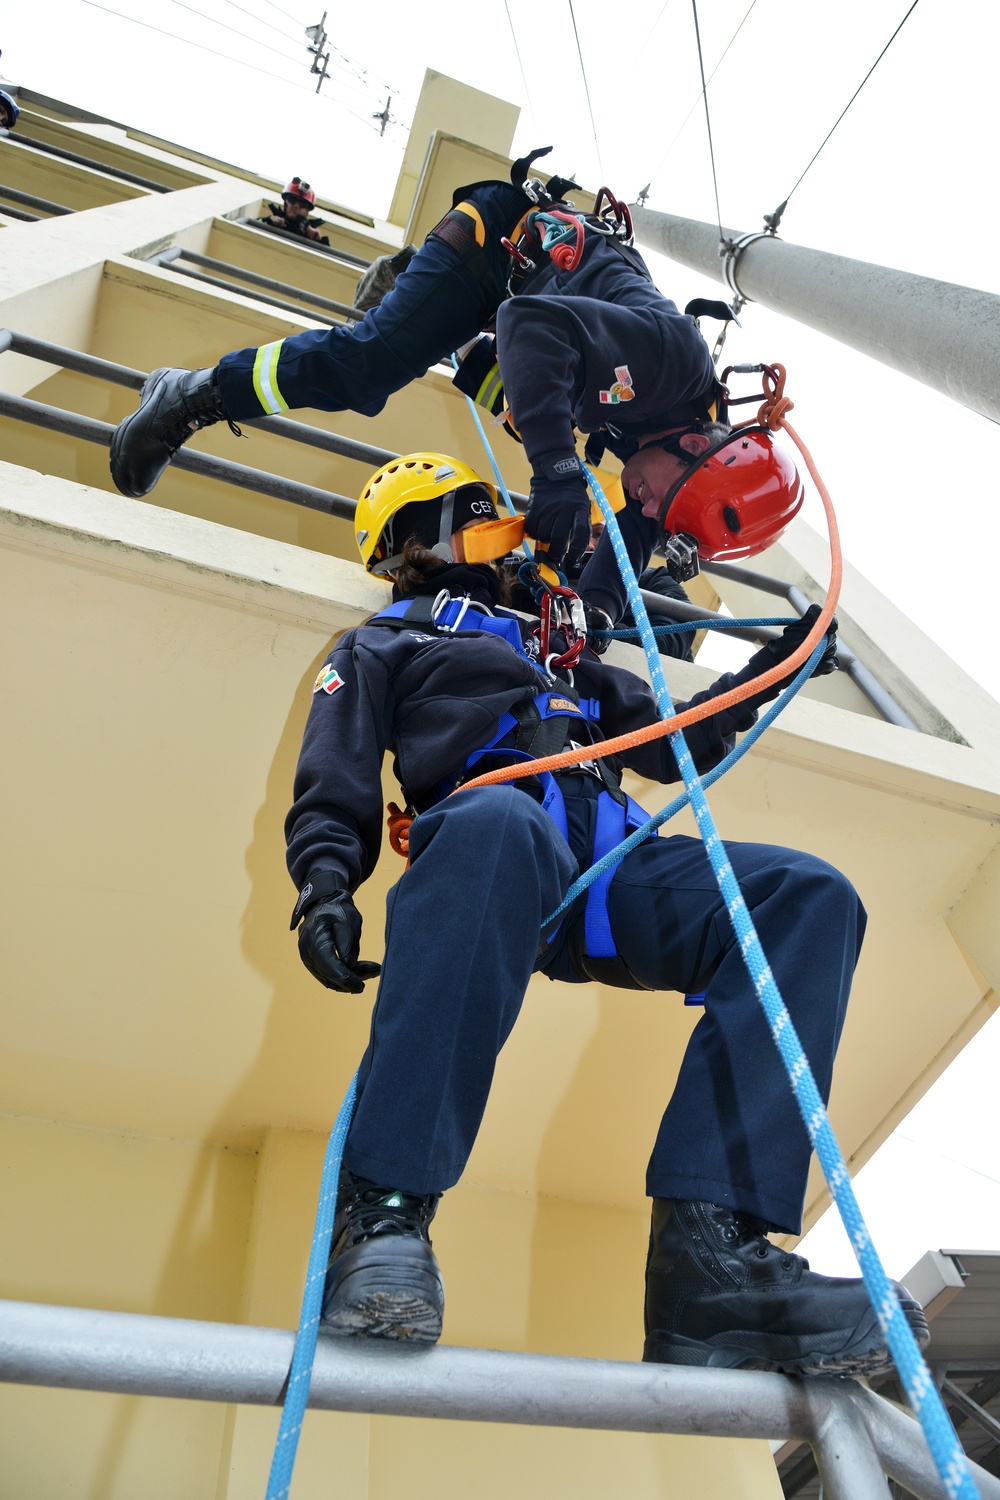 DVIDS - Images - DOD TECHNICAL ROPE RESCUE 1, USAG ITALY FIRE DEPARTMENT  [Image 14 of 19]